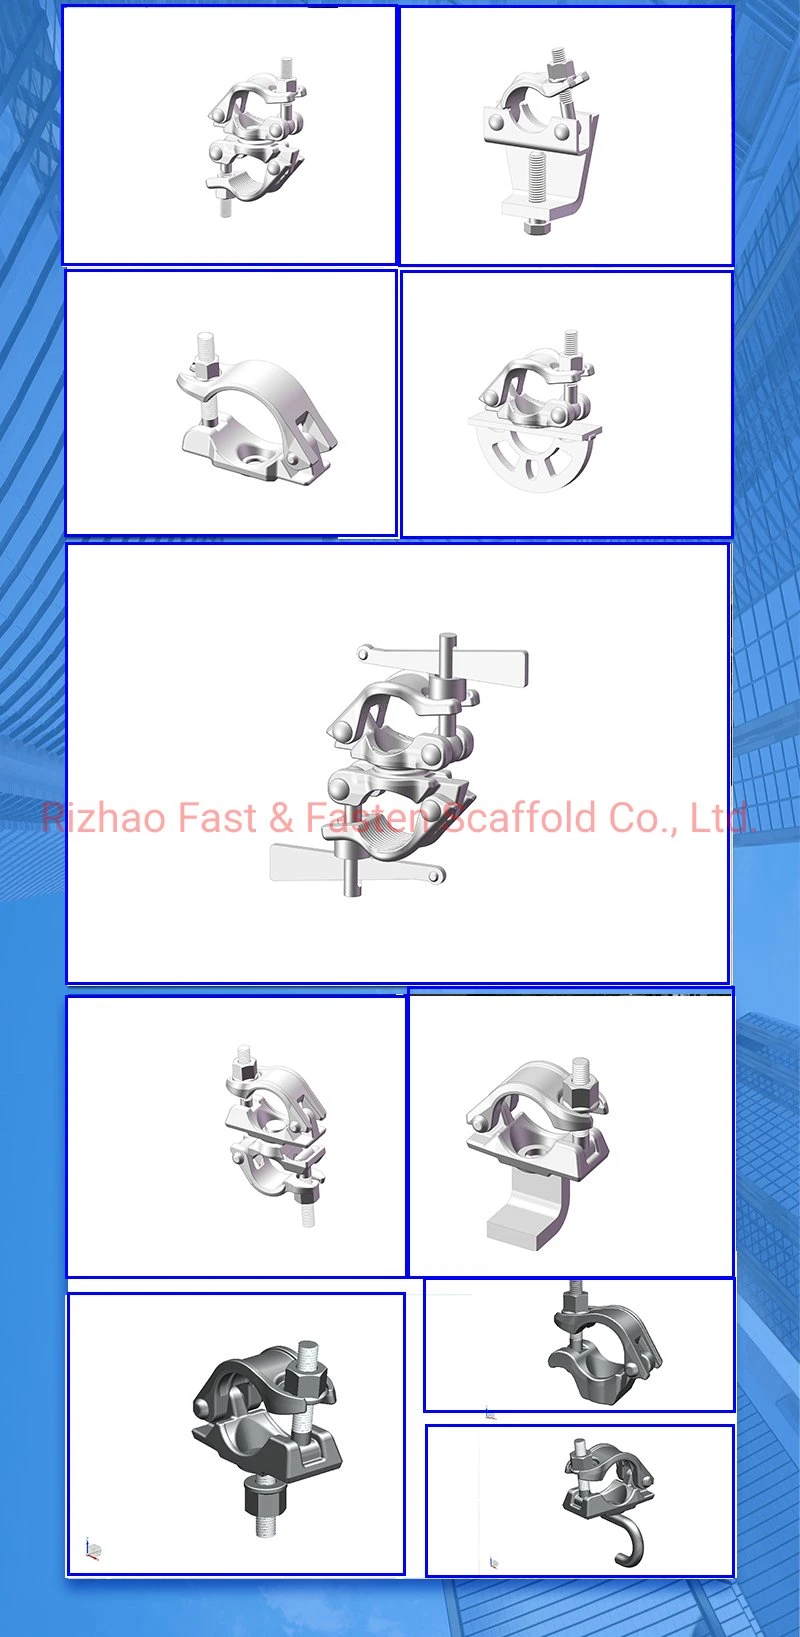 OEM Scaffolding Clamps, Scaffolding Swivel Clamp Tube and Clamp Scaffold Swivel Coupler